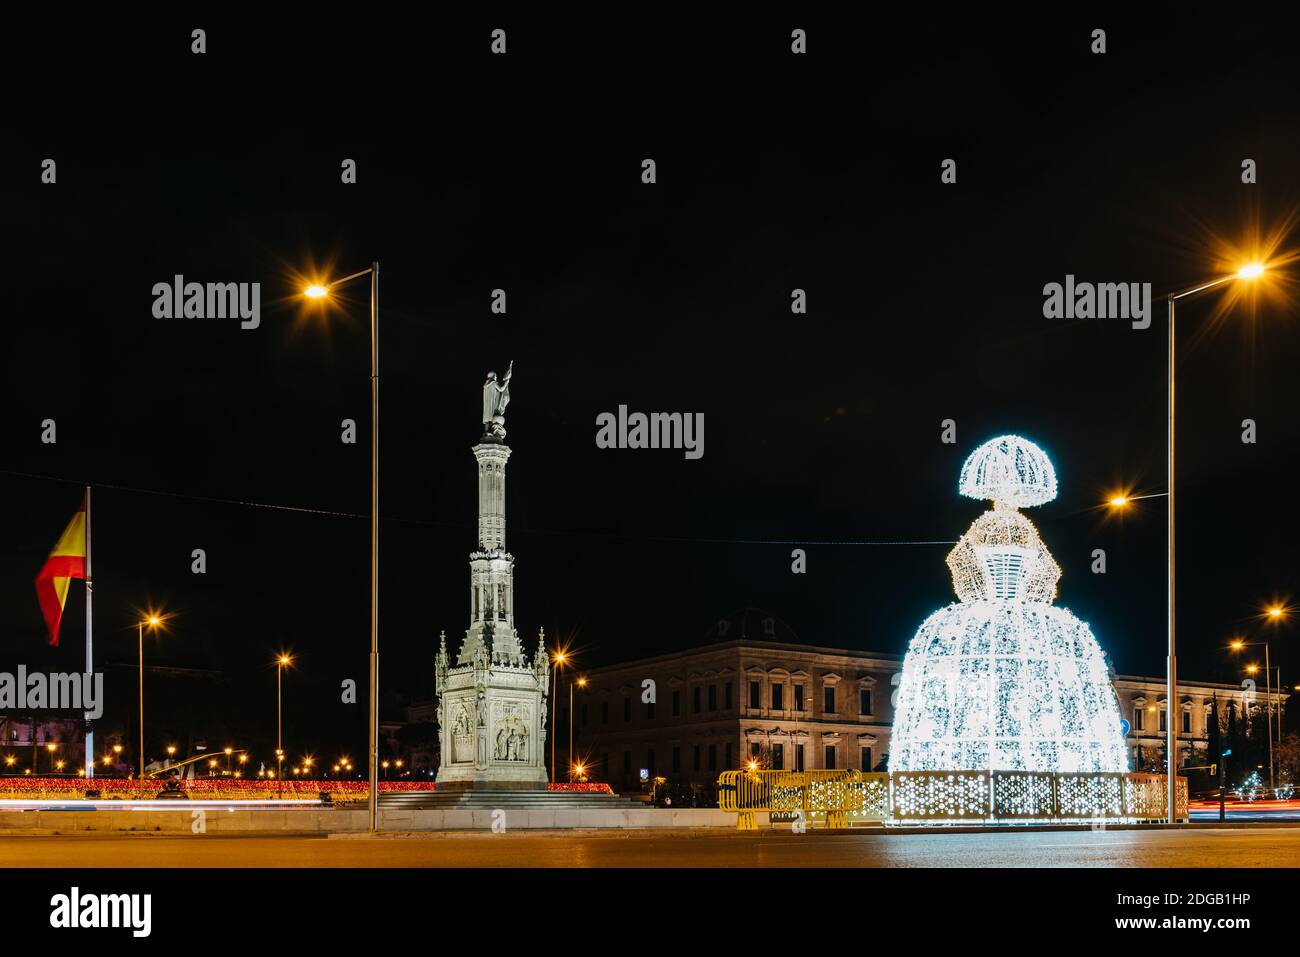 Square of Colon with Menina of Velazquez figure lluminated at Christmas. Madrid, Spain Stock Photo